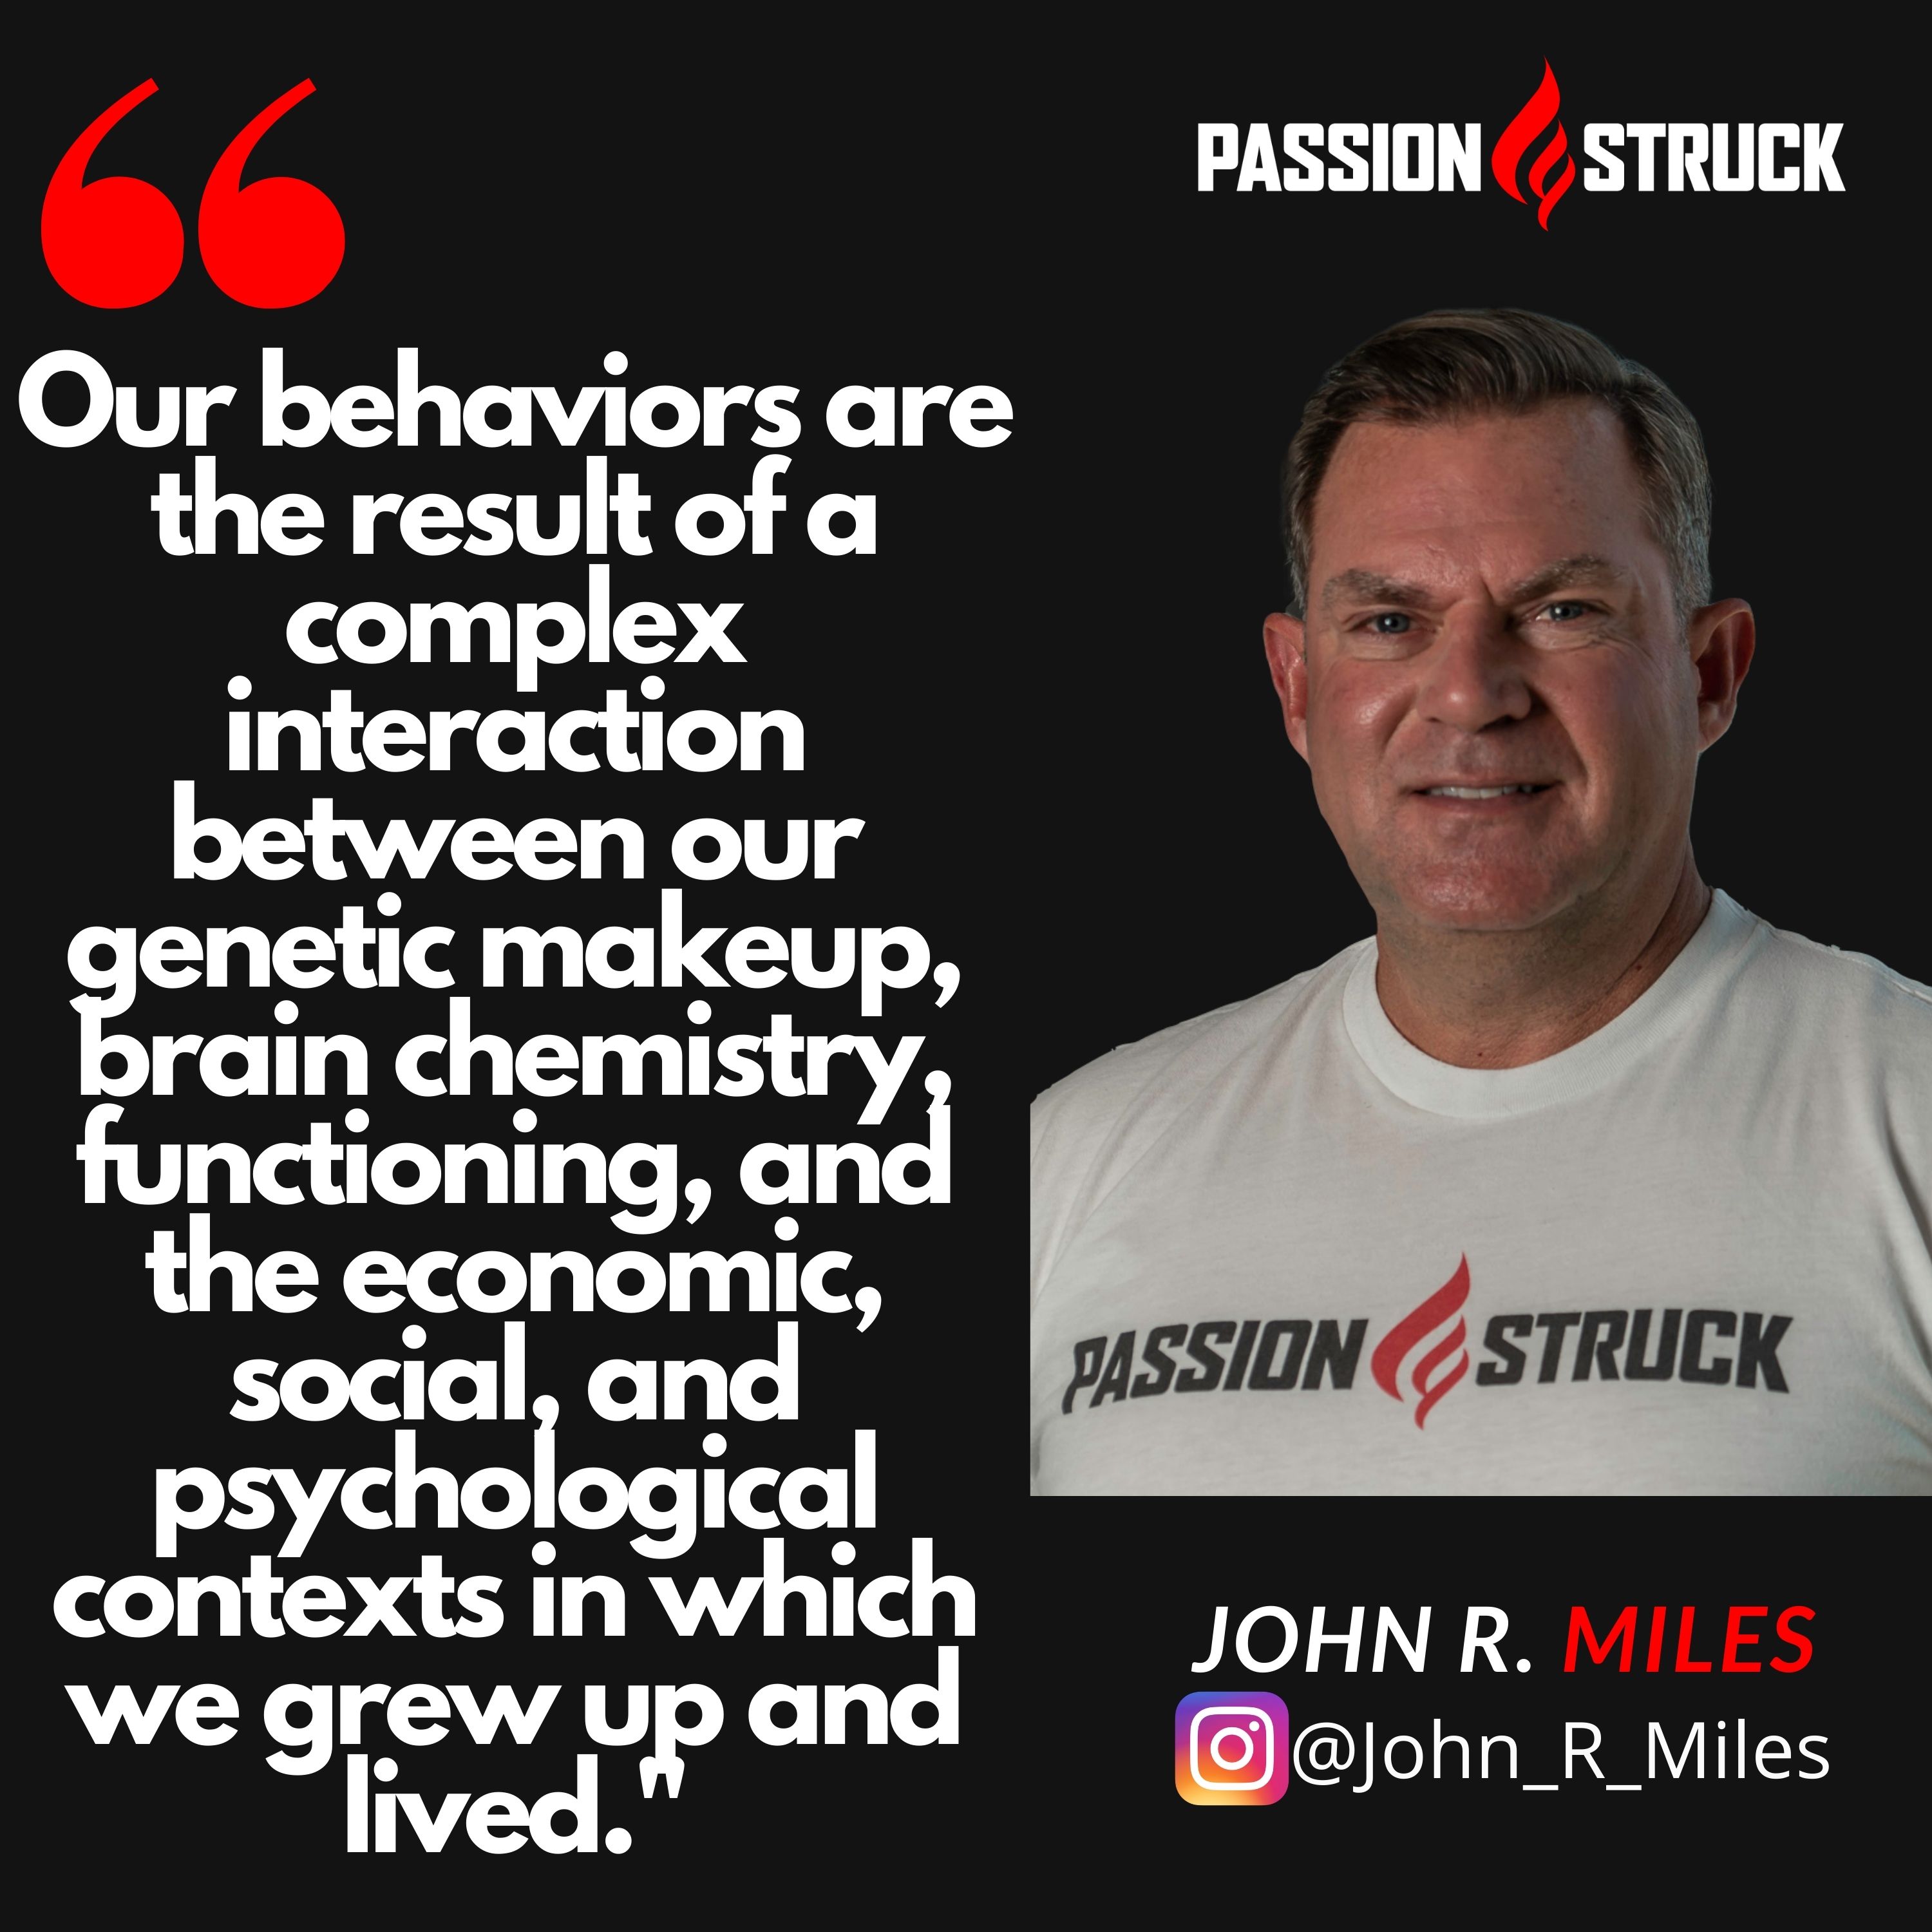 John R. Miles quote on how our behaviors are impacted by all aspects of your life and upbringing